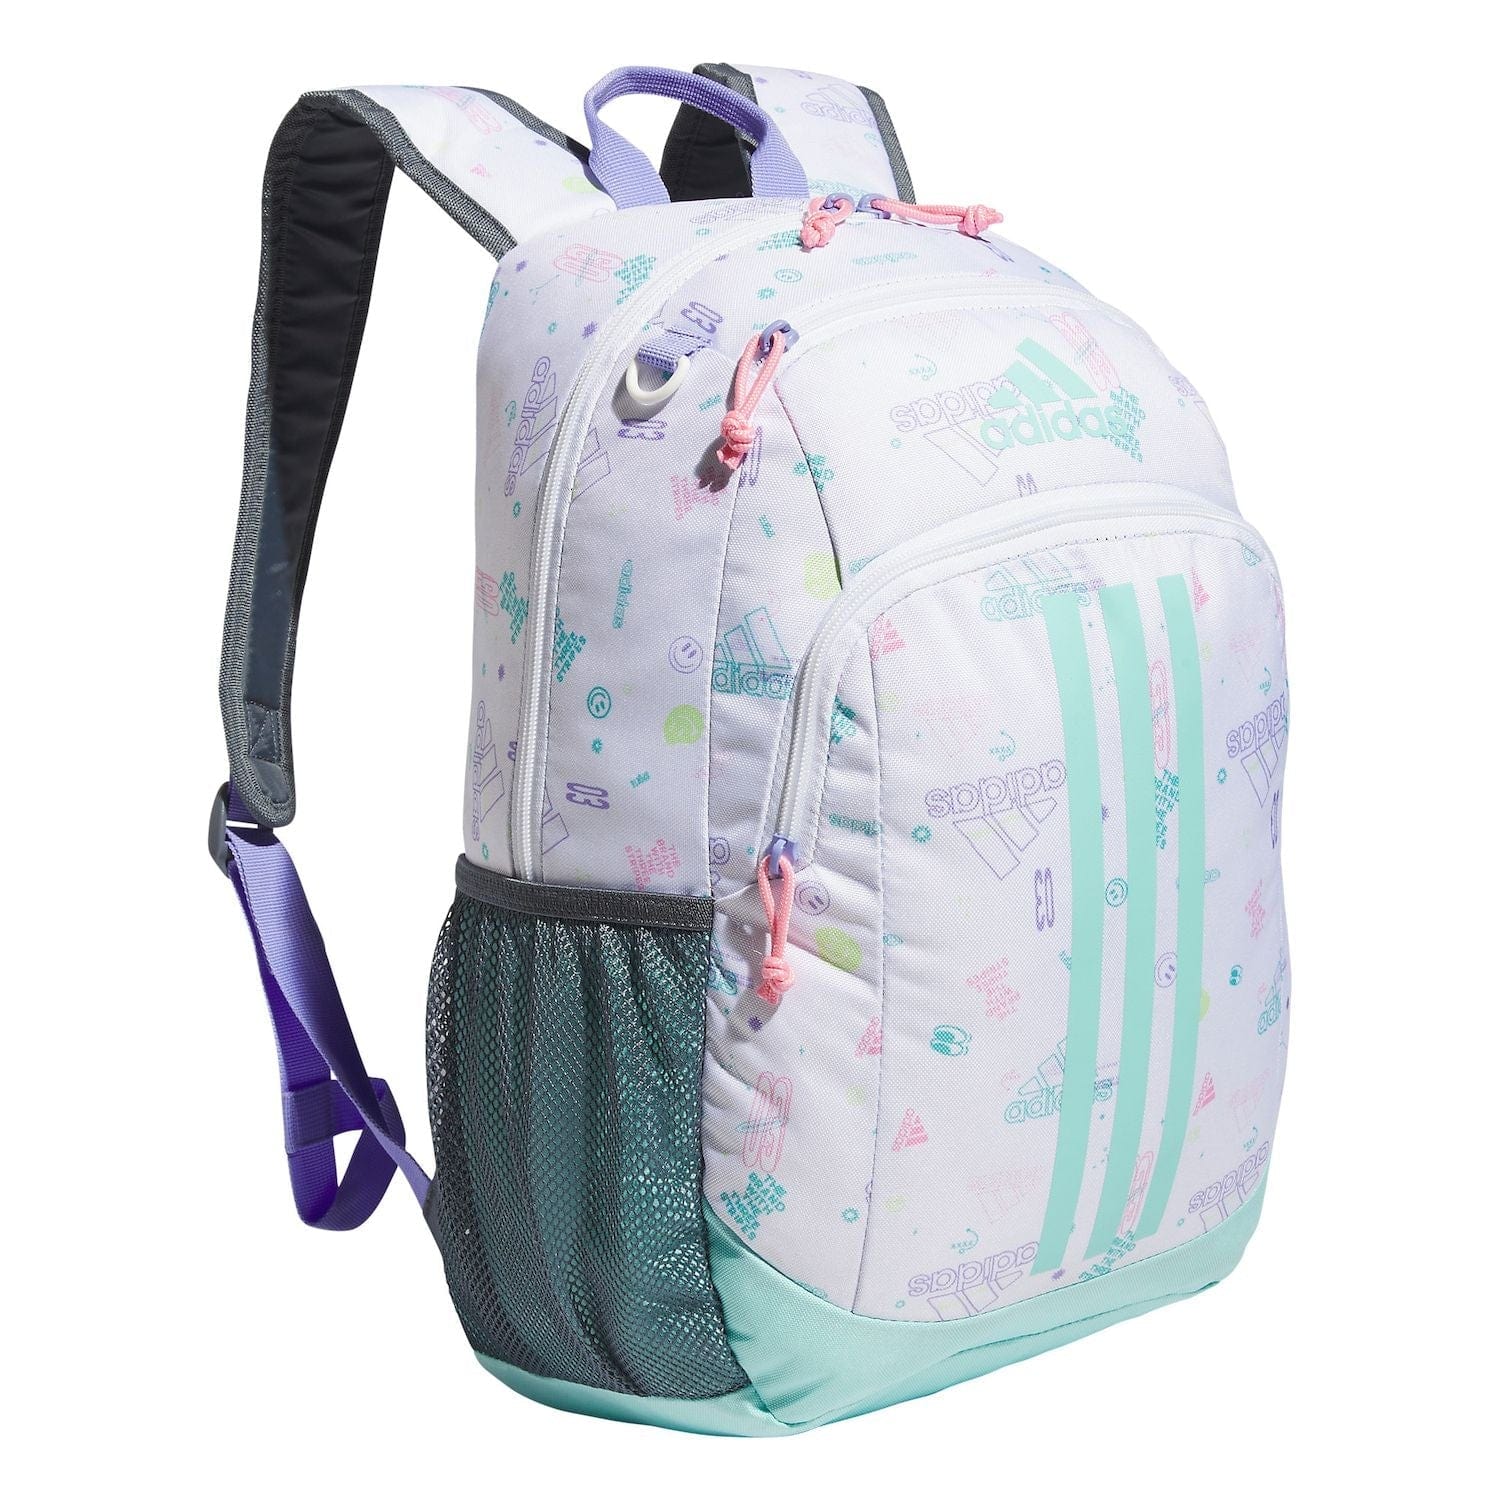 Young BTS Creator 2 Kids Backpack - CLASSY CLOSET BOUTIQUEYoung BTS Creator 2 Kids Backpackbackpack4844672Icon Brand Love White